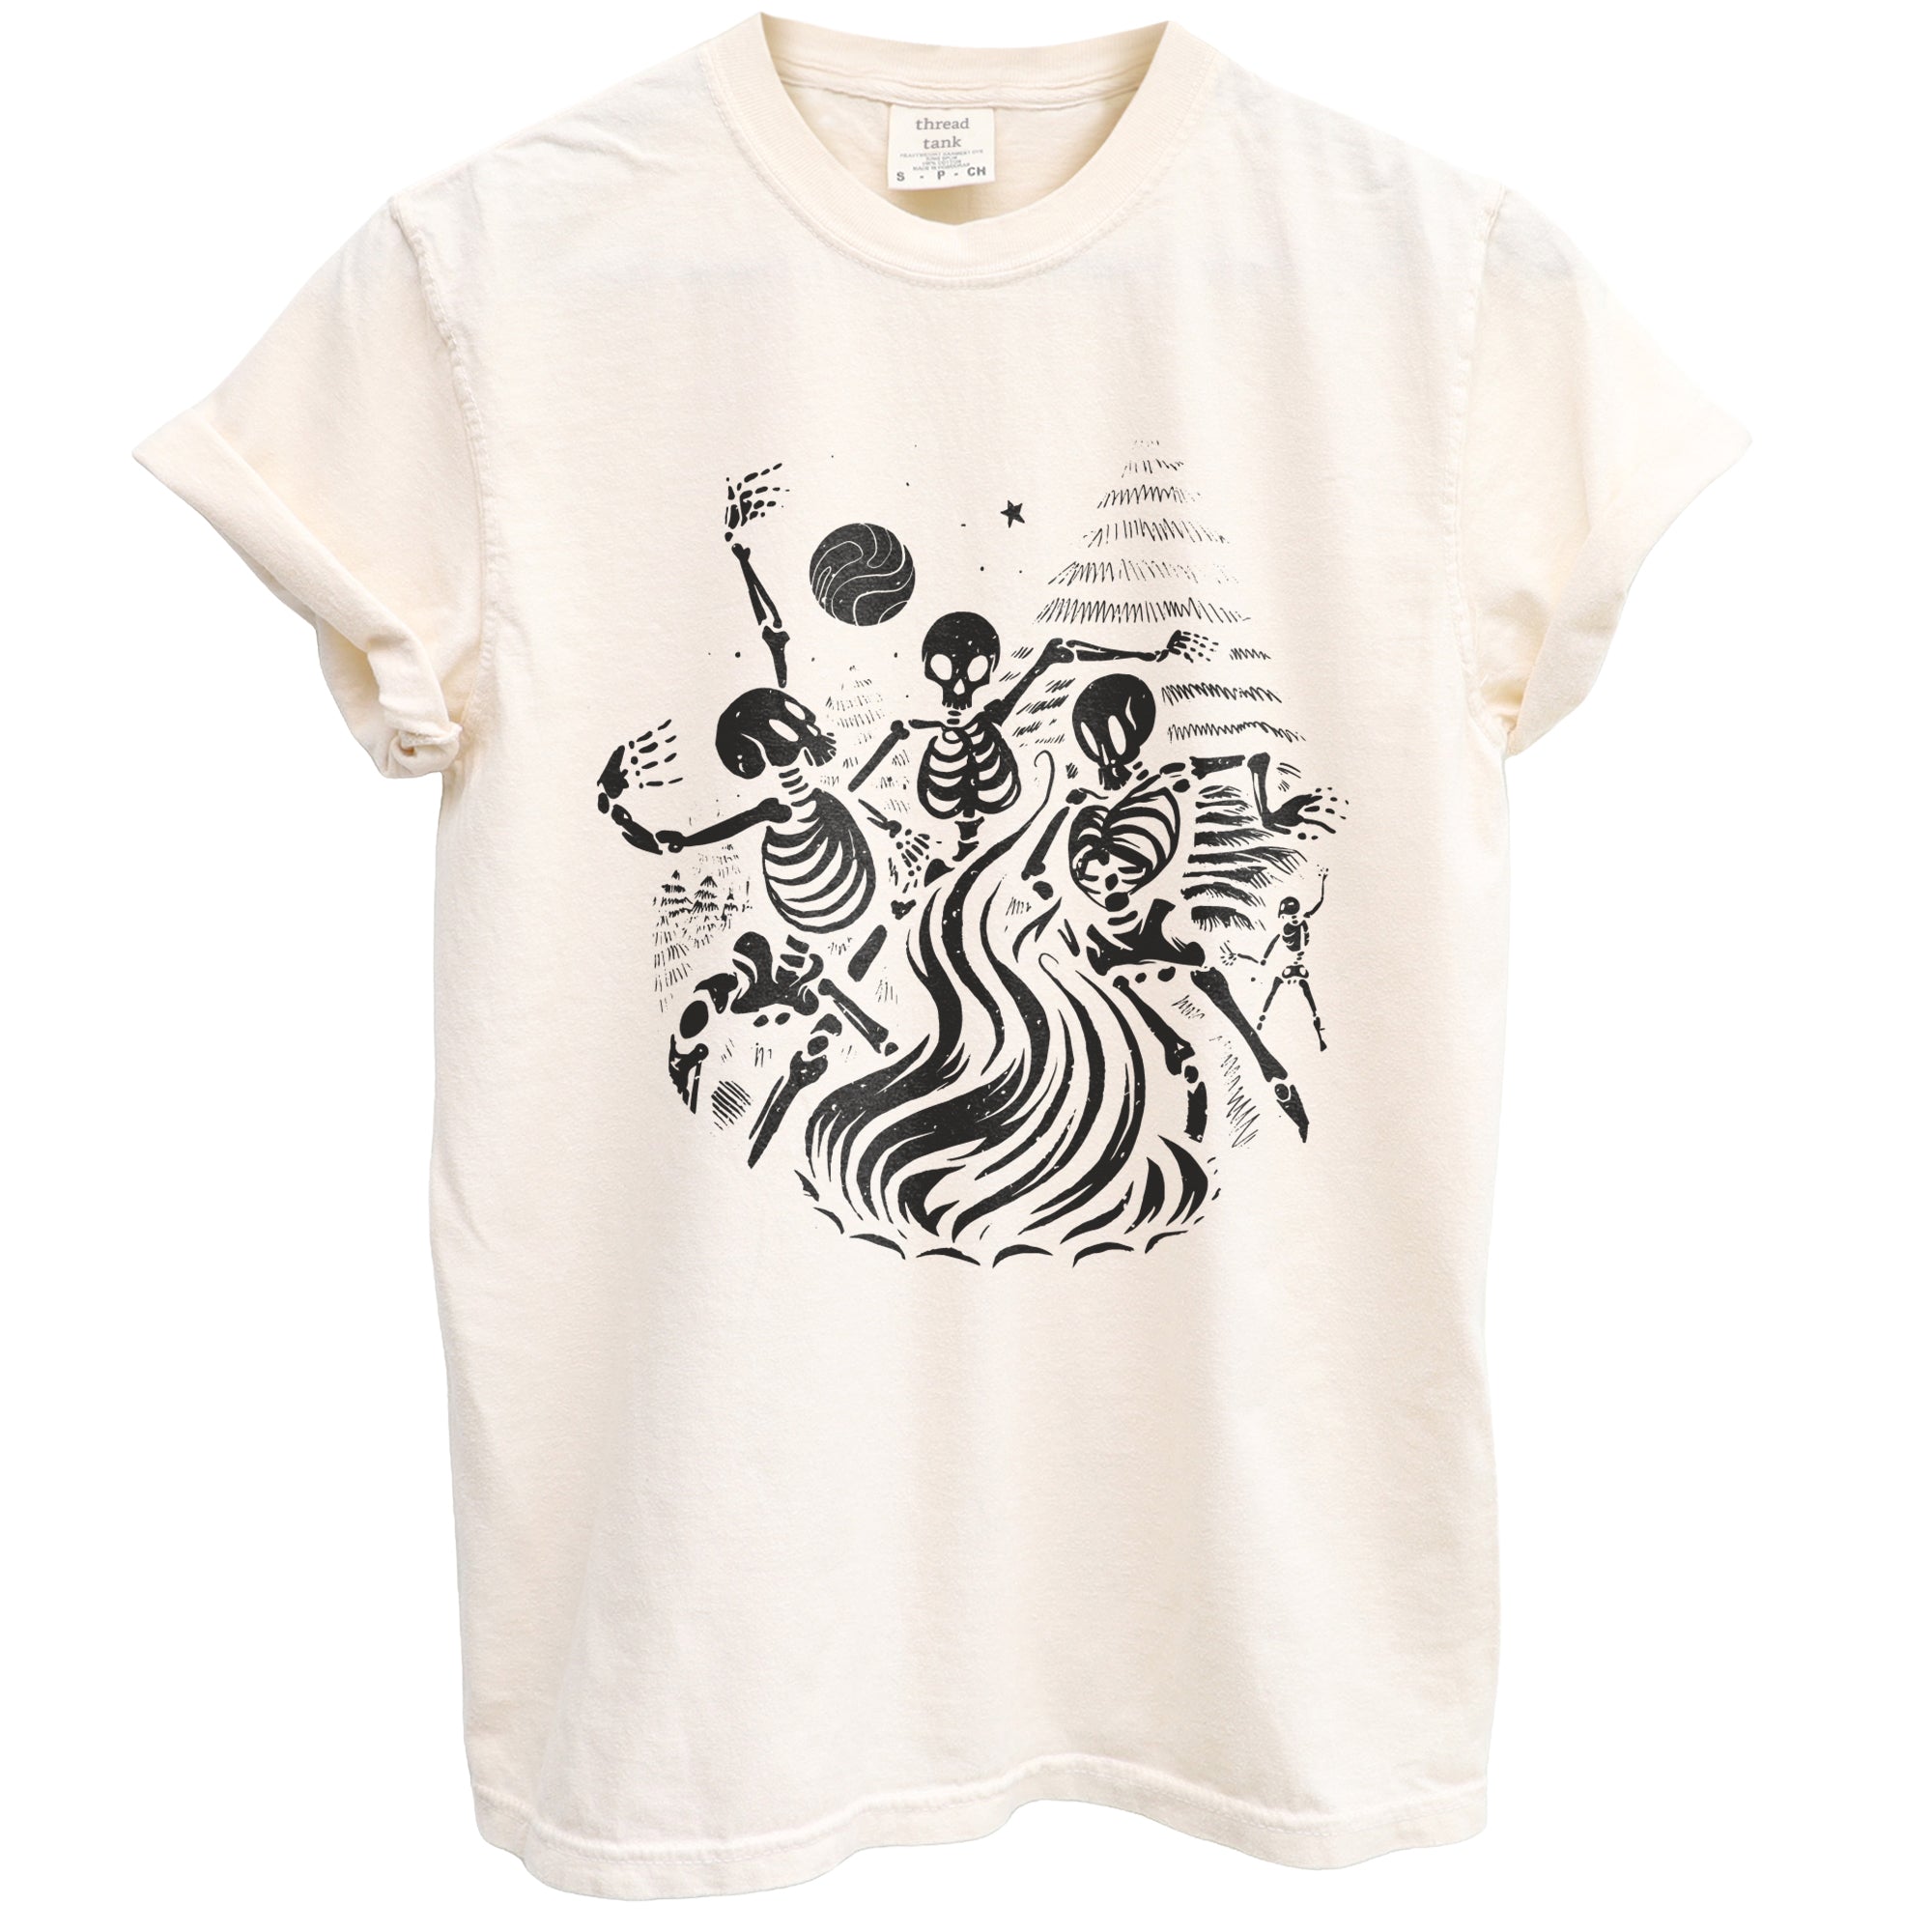 Skeleton Dancing Tree Garment-Dyed Tee - Stories You Can Wear